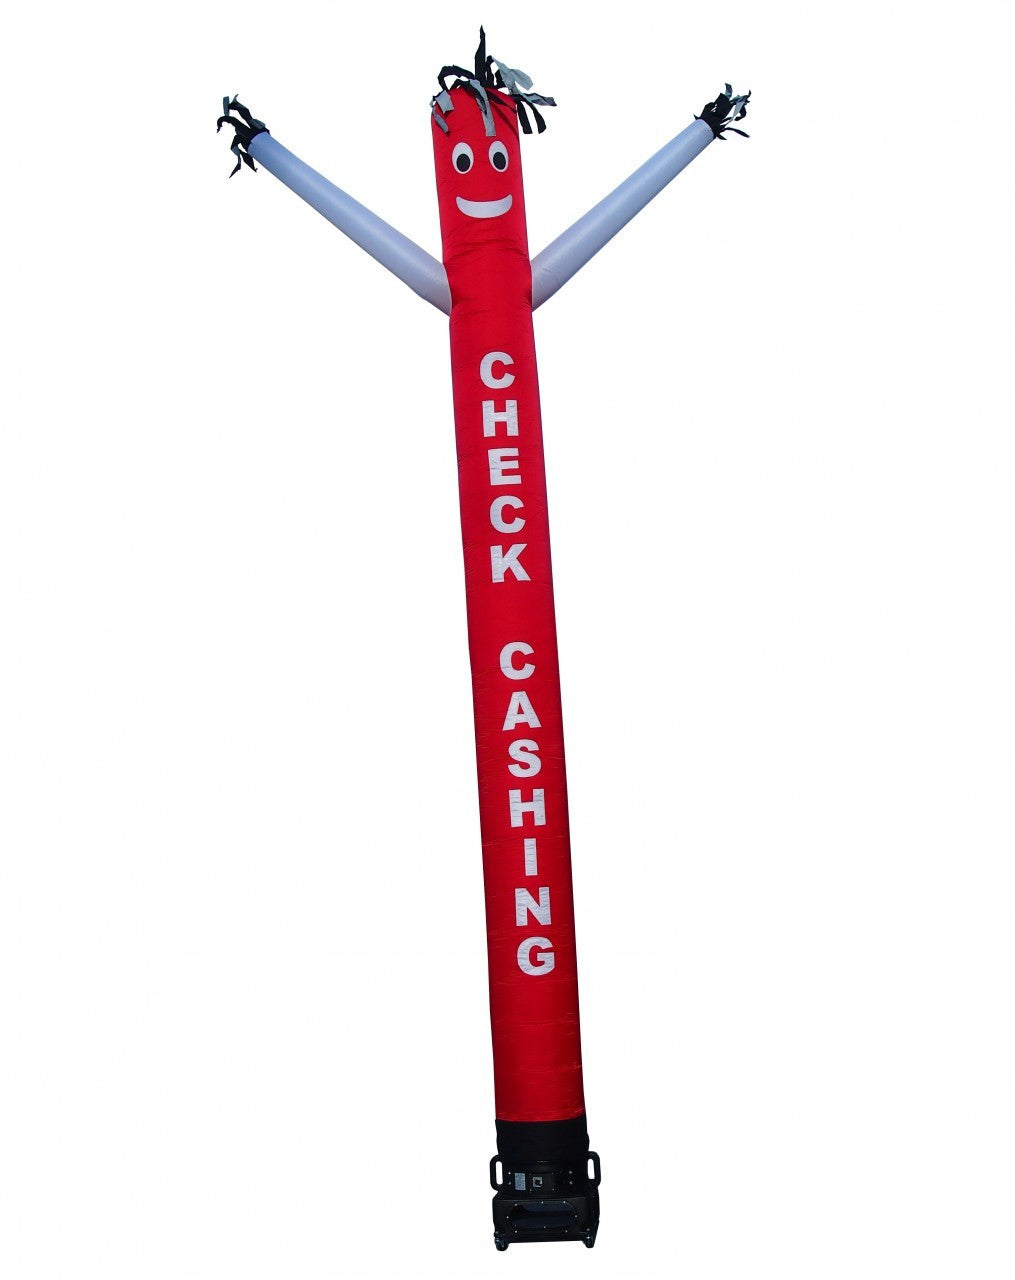 20ft Check Cashing Red Air Dancer with White Arms Tube Inflatable